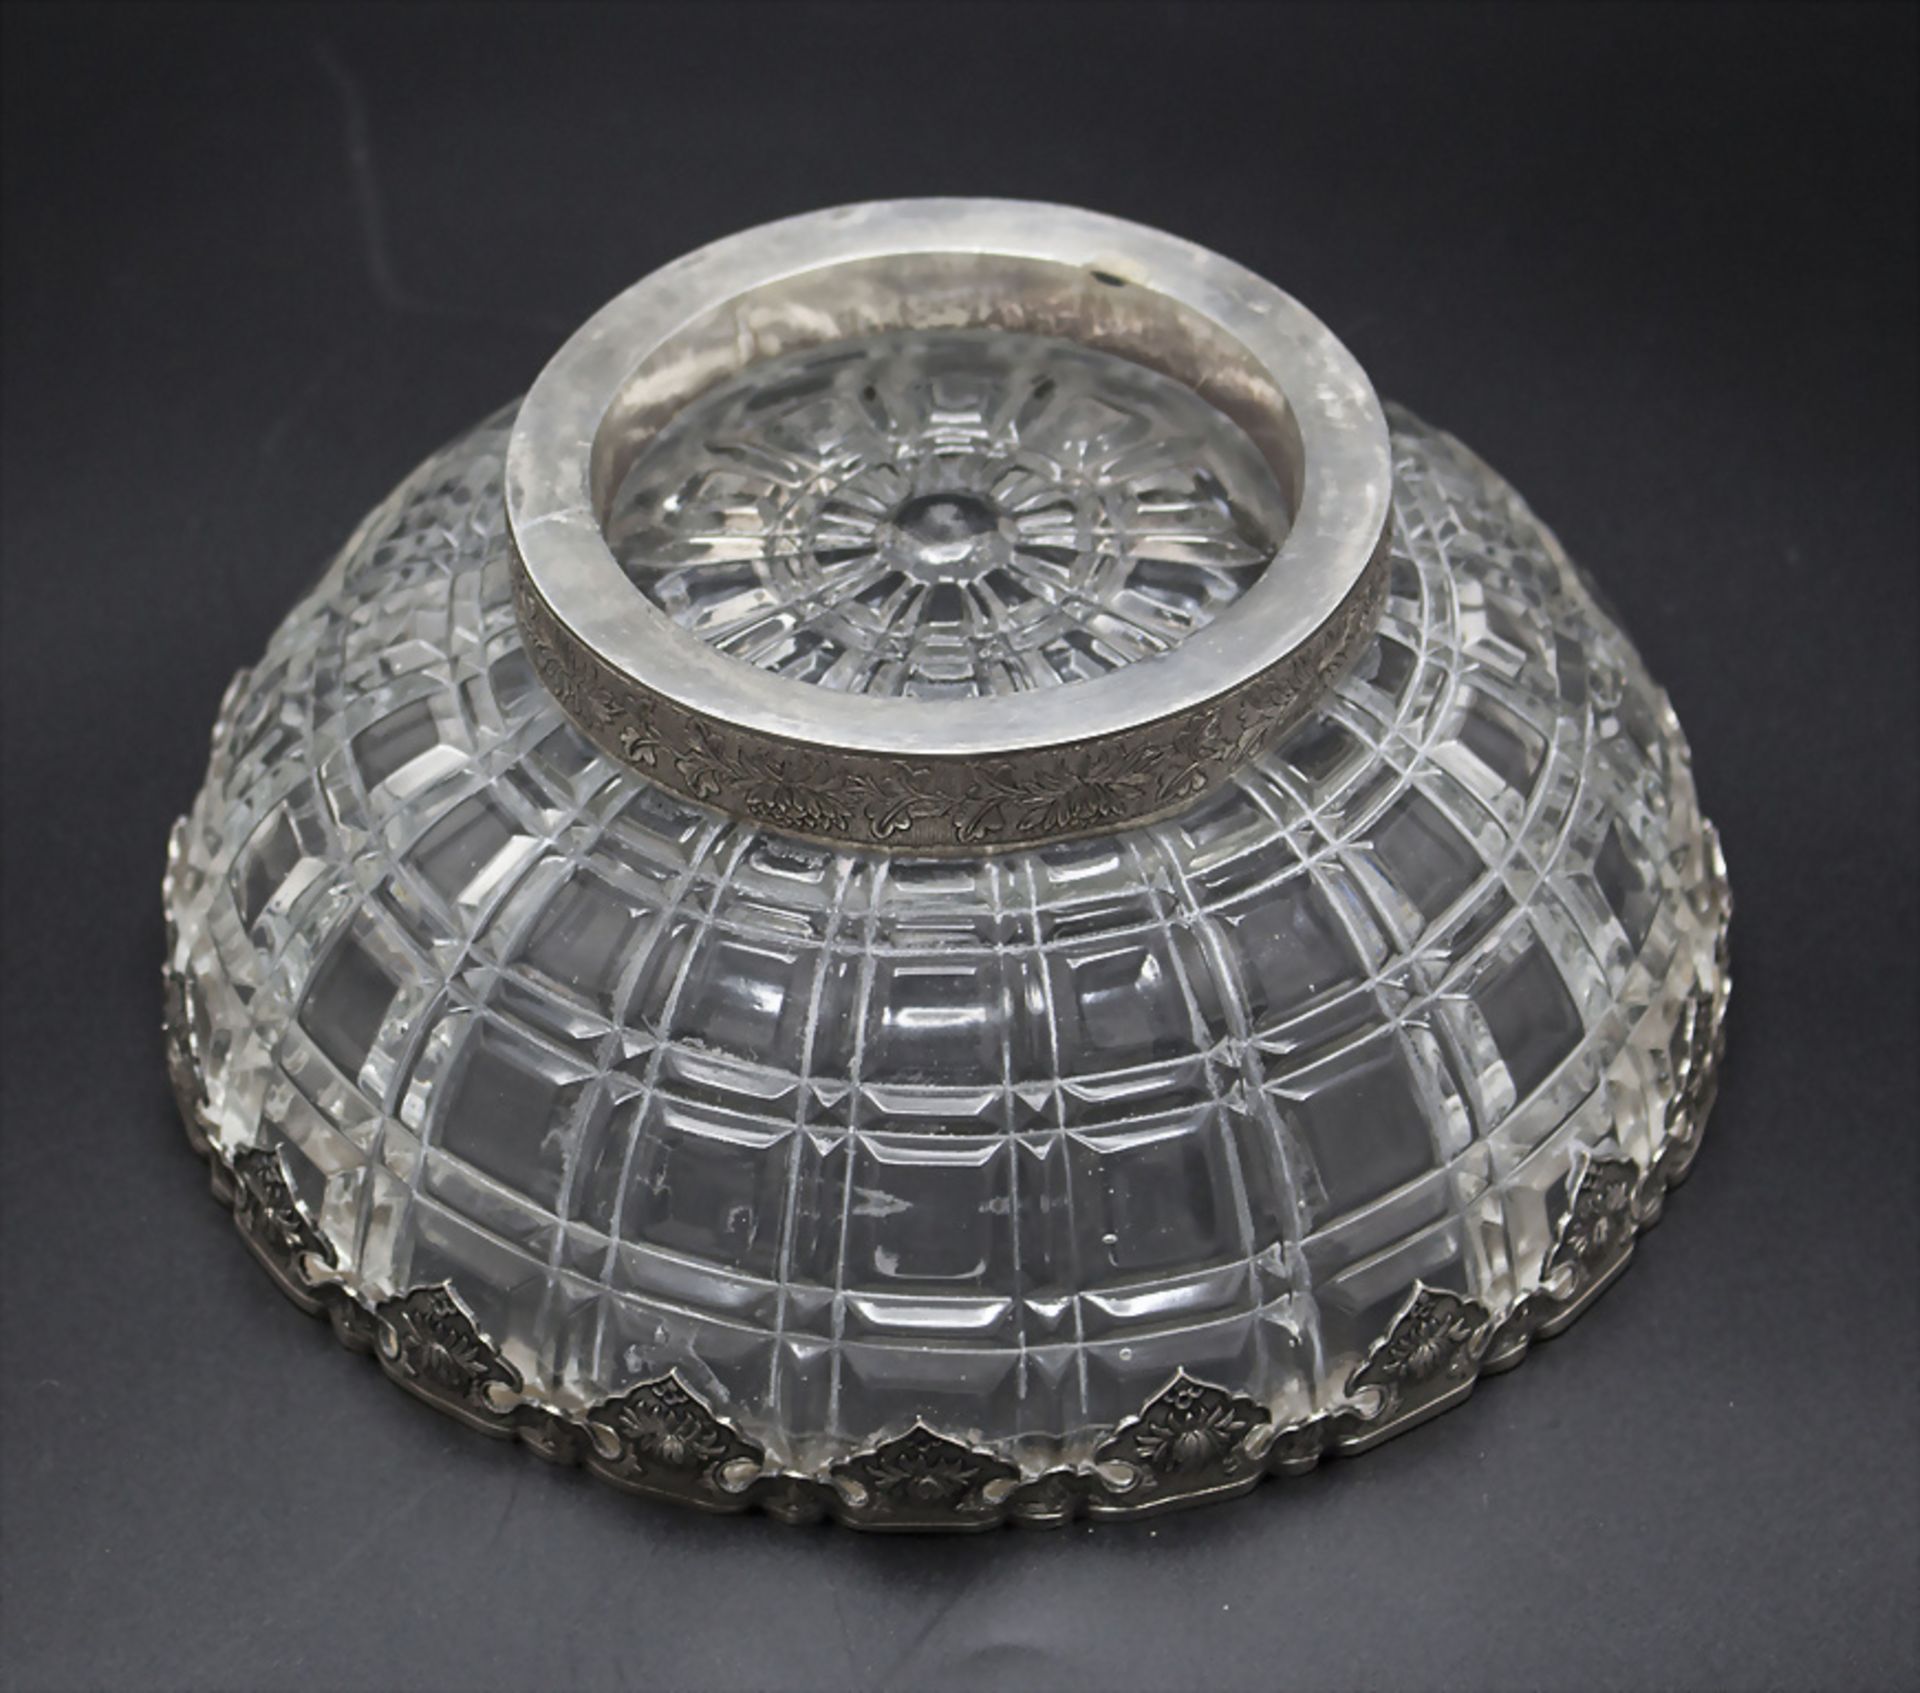 Glasschale mit Silbermontur / A cut glass bowl with silver mount, Orient oder Asien, Anfang 20. Jh. - Image 2 of 4